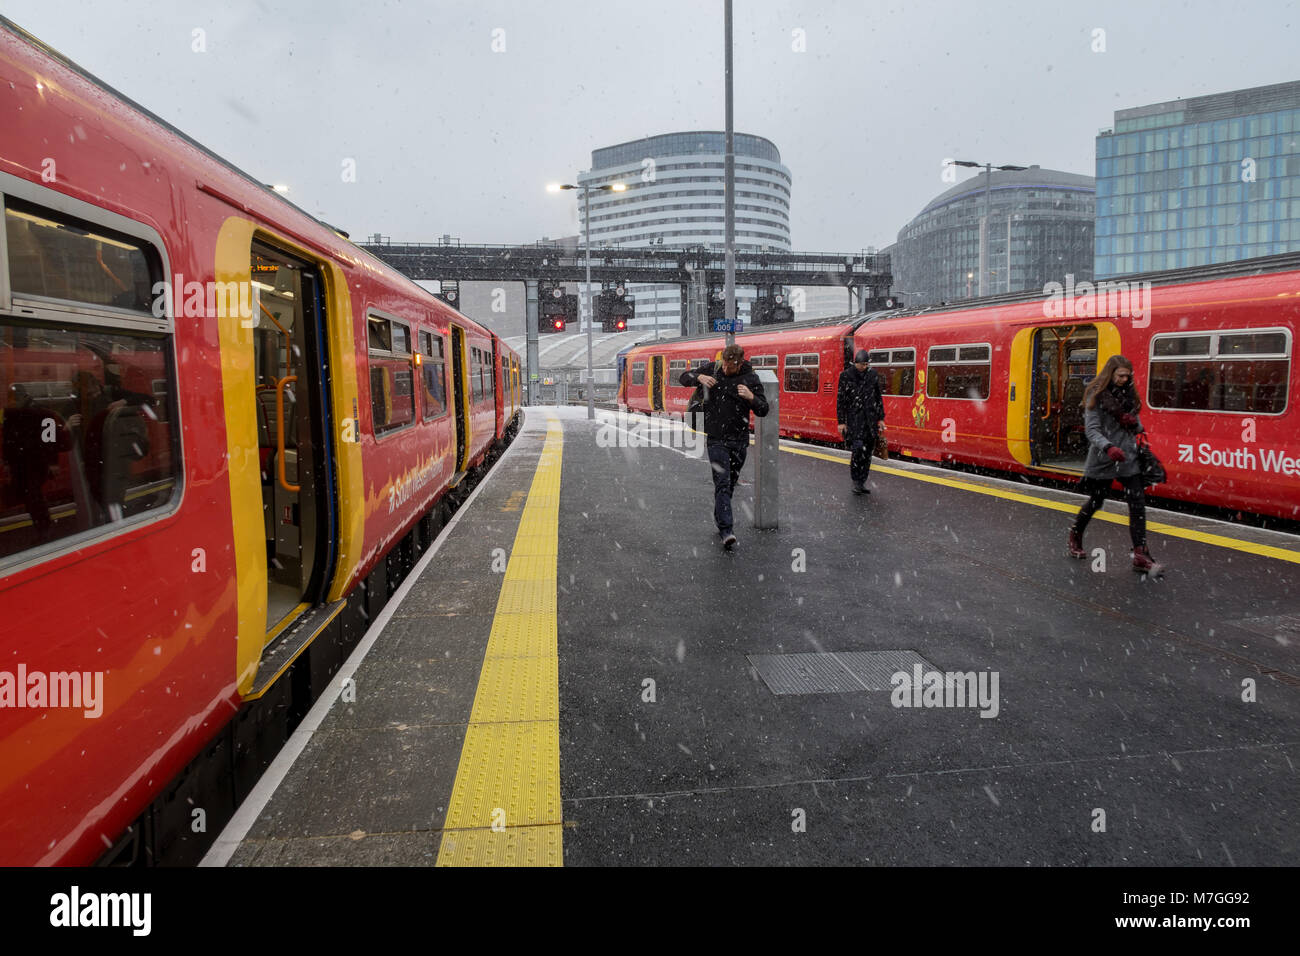 Passengers arriving at Waterloo station, London during a flurry of snow Stock Photo